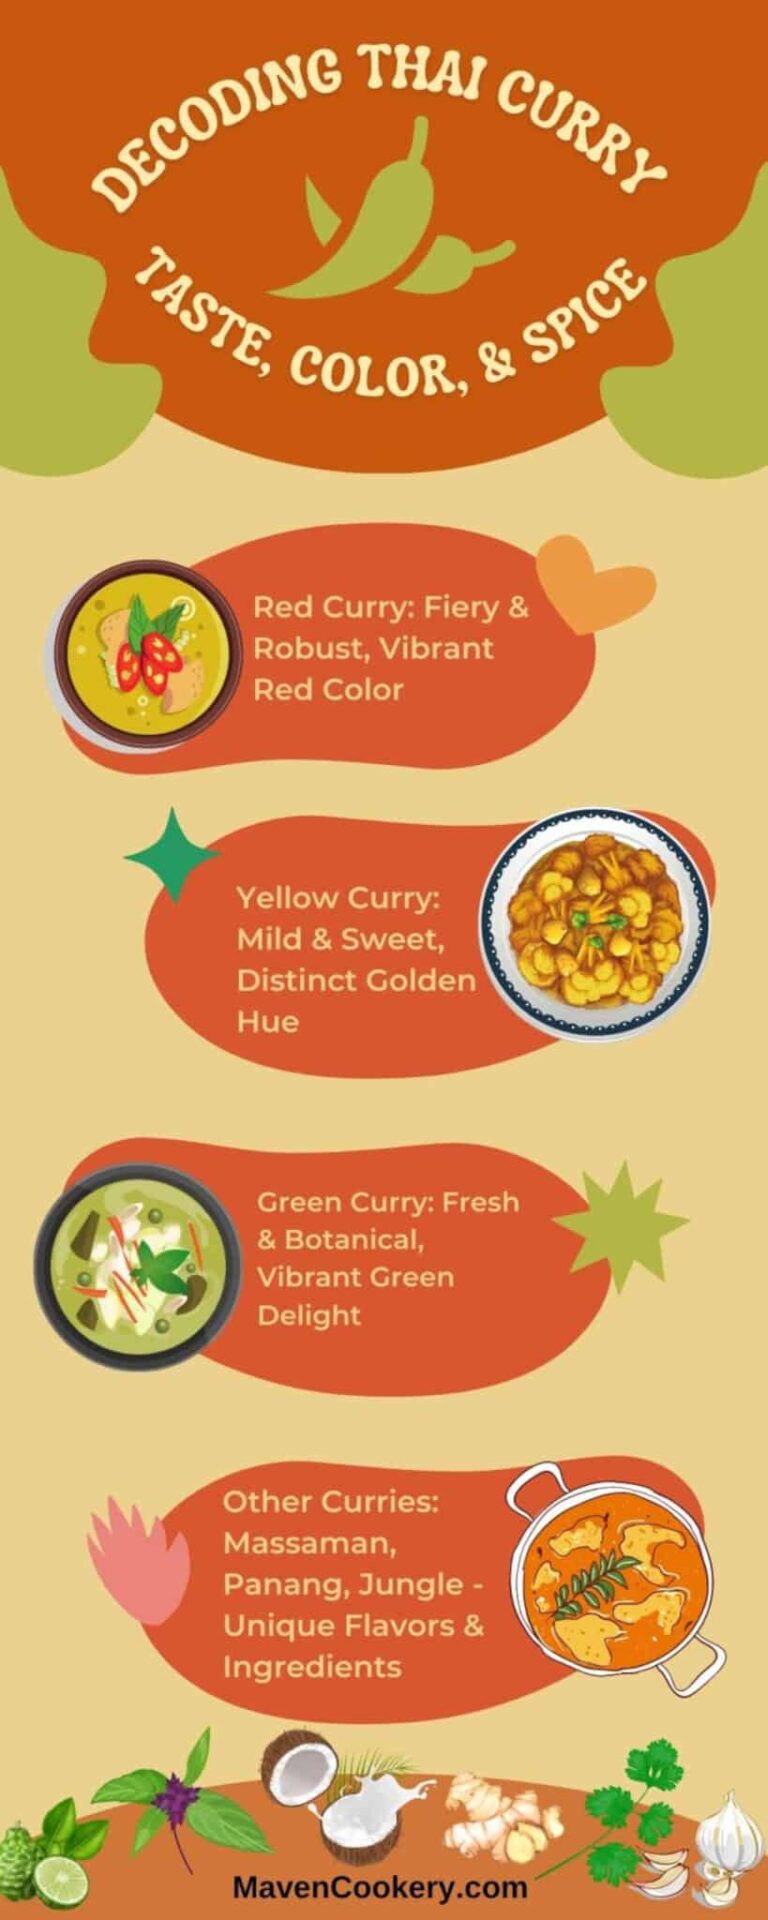 Green Curry vs Red: Comparing Thai Curry Color and Flavor